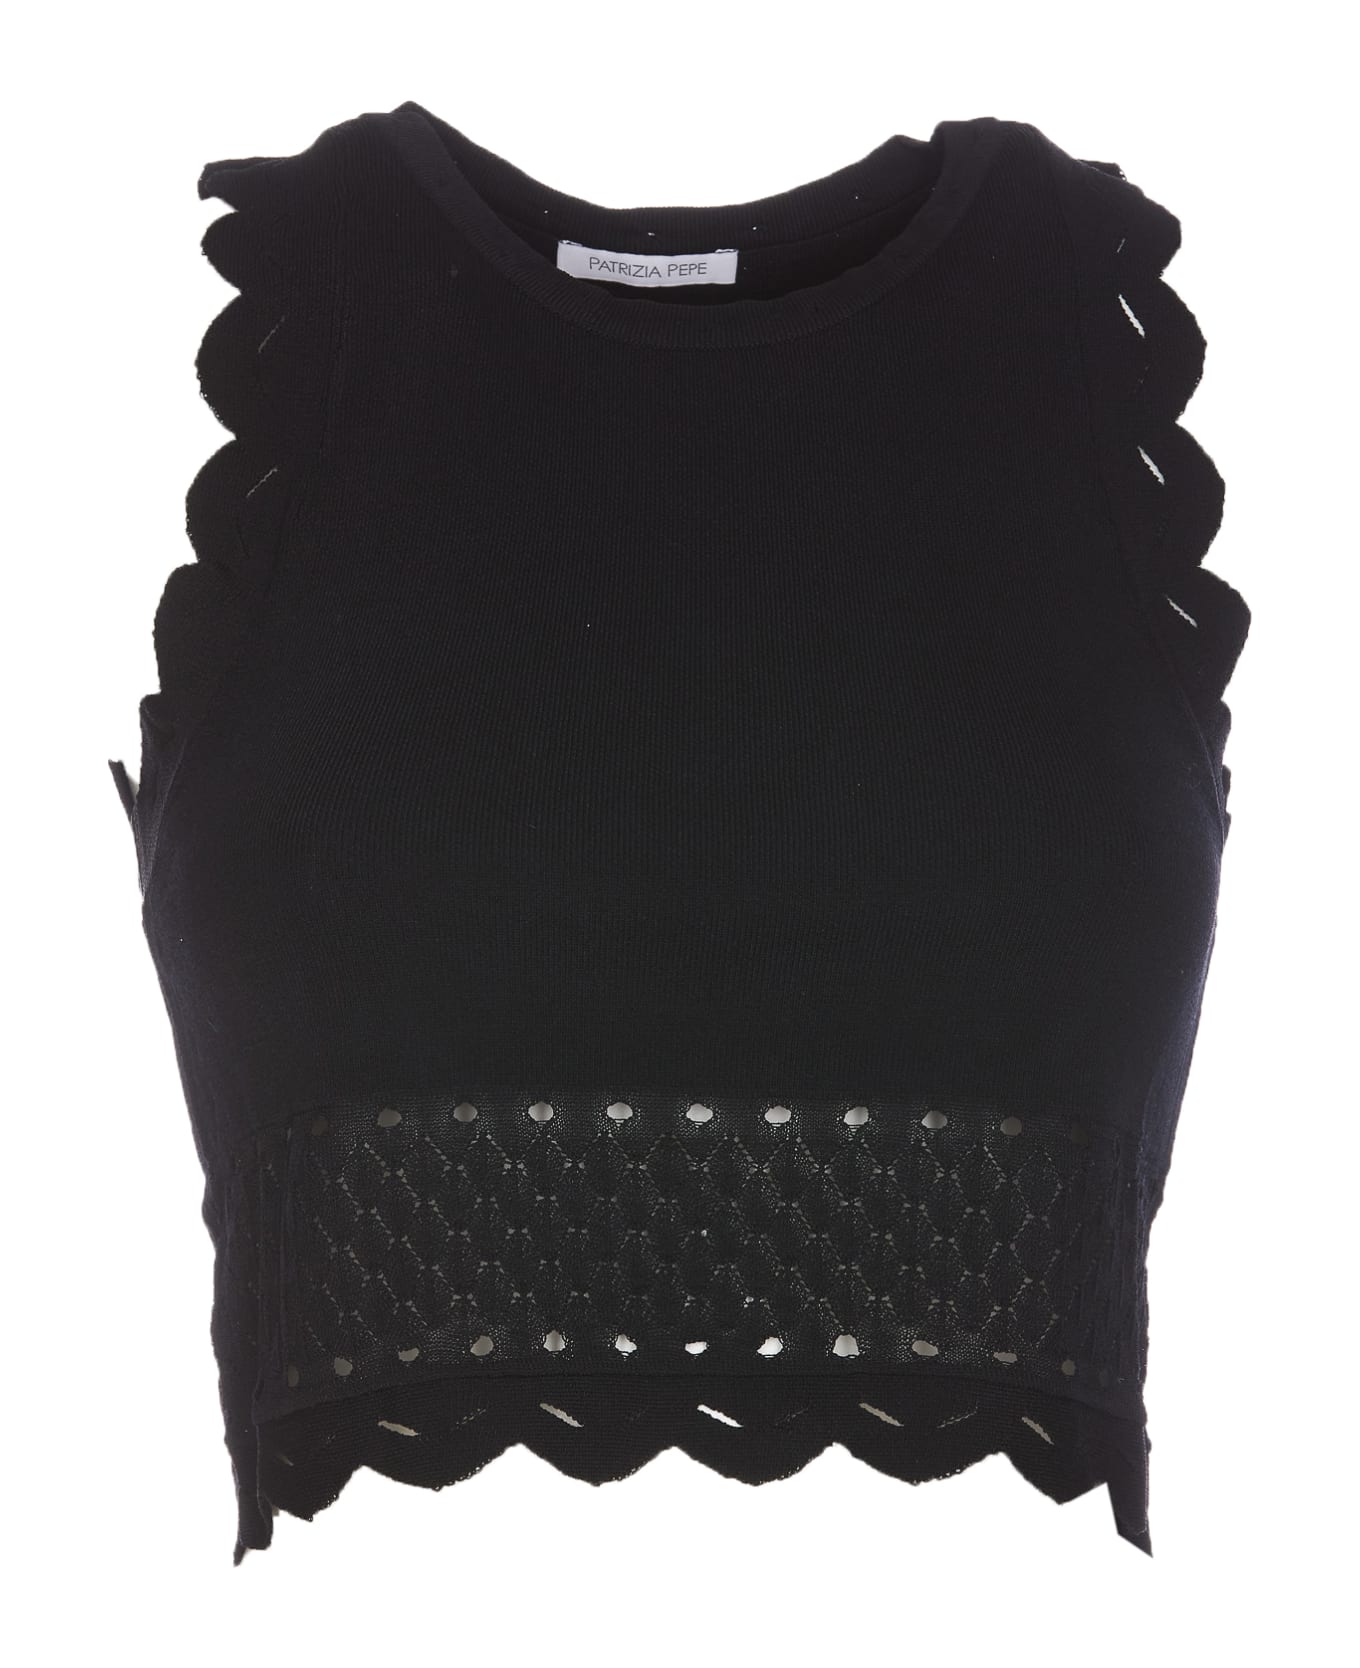 Patrizia Pepe Knitted Top - Black トップス